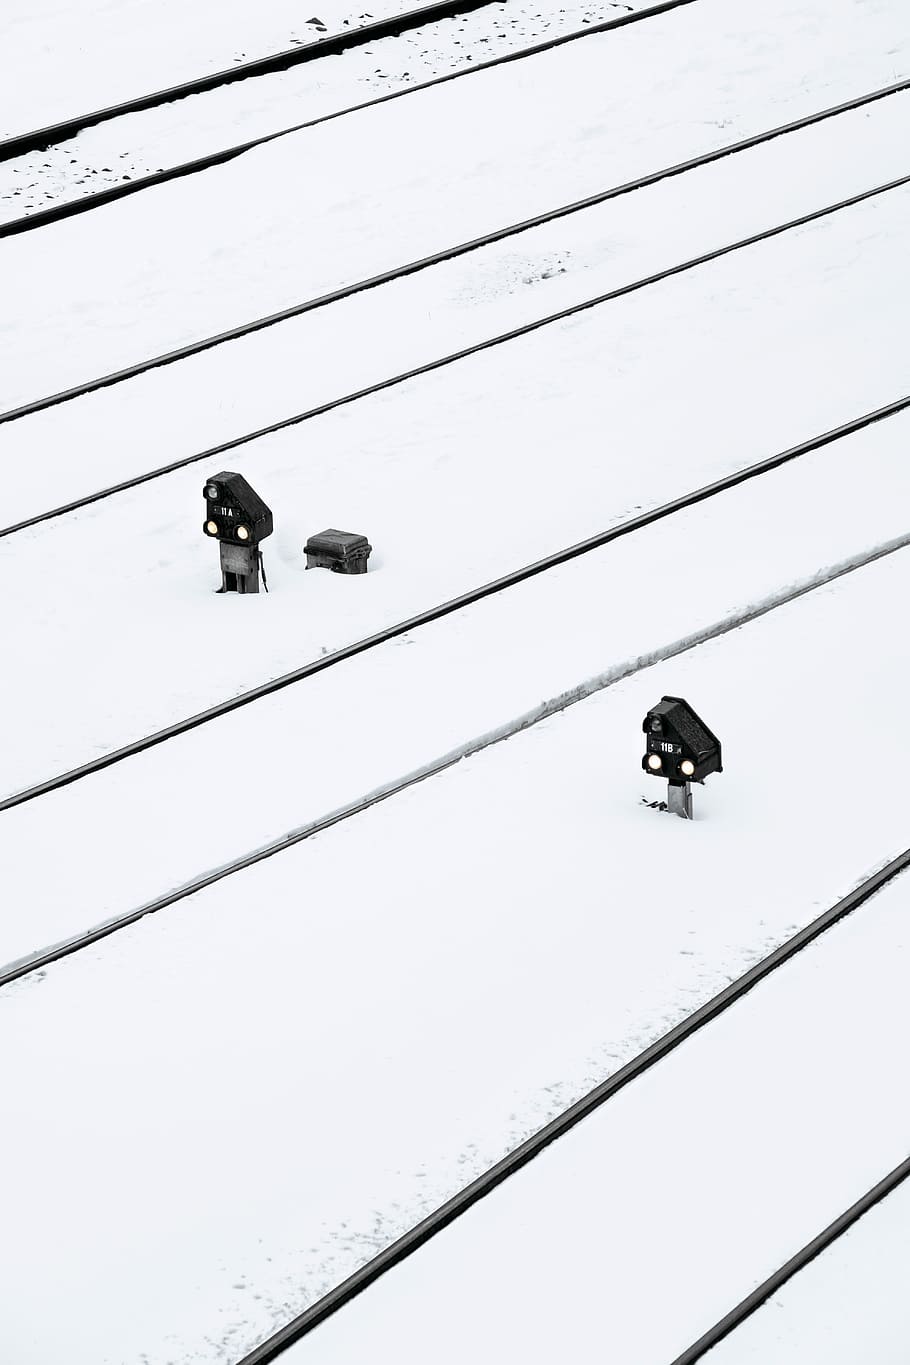 Train tracks under the heavy snow, two black-and-gray metal tools on the ground with snows